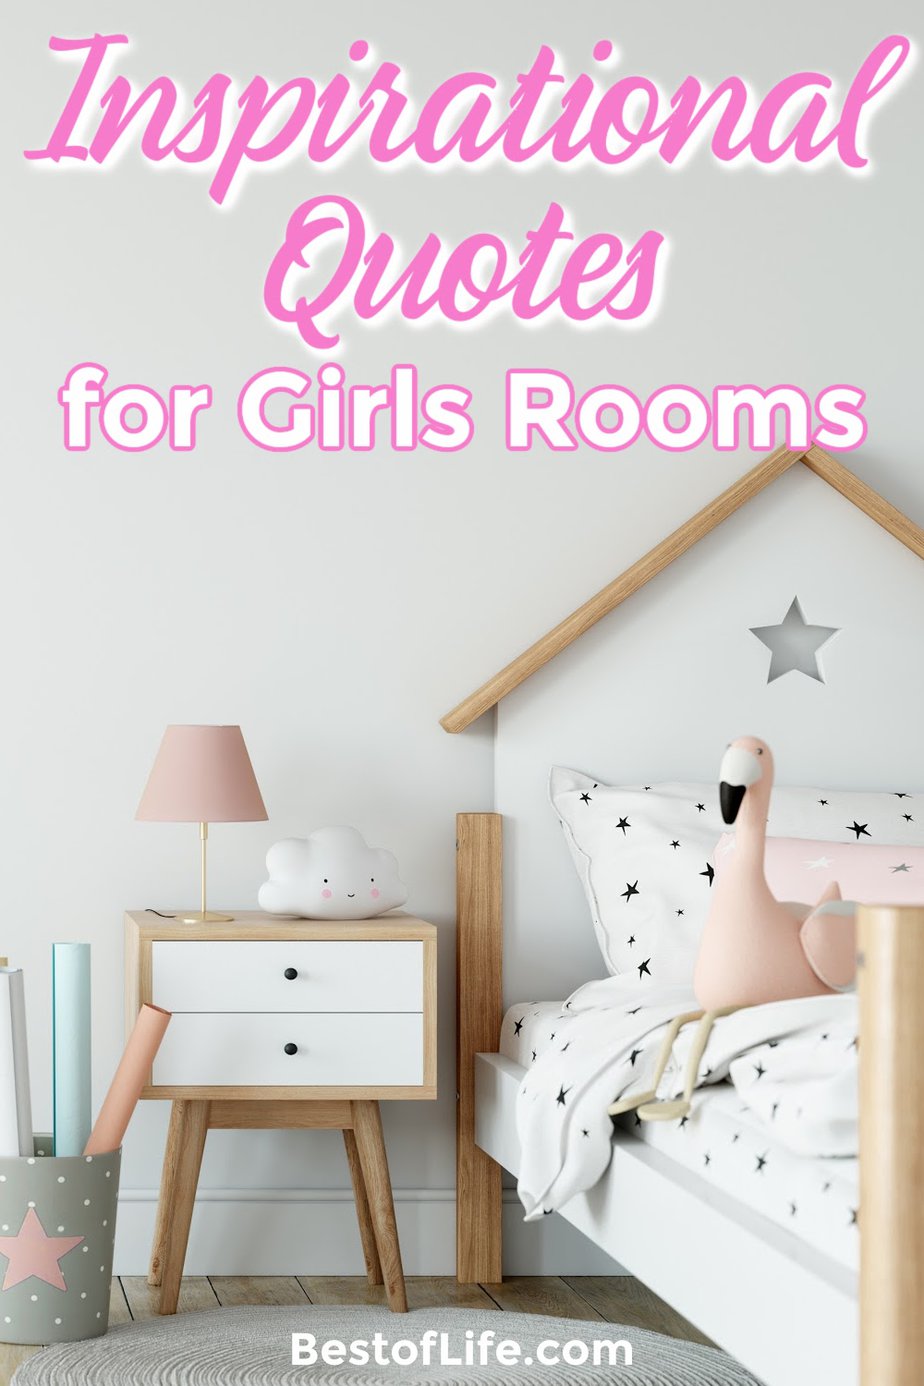 When choosing quotes for girls room you have to find something that is just right! Something determined and whimsical with a touch of fun! Best Quotes for Girls | Girls Room Decor Ideas | Decor for Girls Room | Inspirational Quotes for Girls | Motivational Quotes for Girls | DIY Room Decor | Girls Room Wall Art | Inspirational Wall Art for Kids #inspirationalquotes #quotesforgirls via @thebestoflife